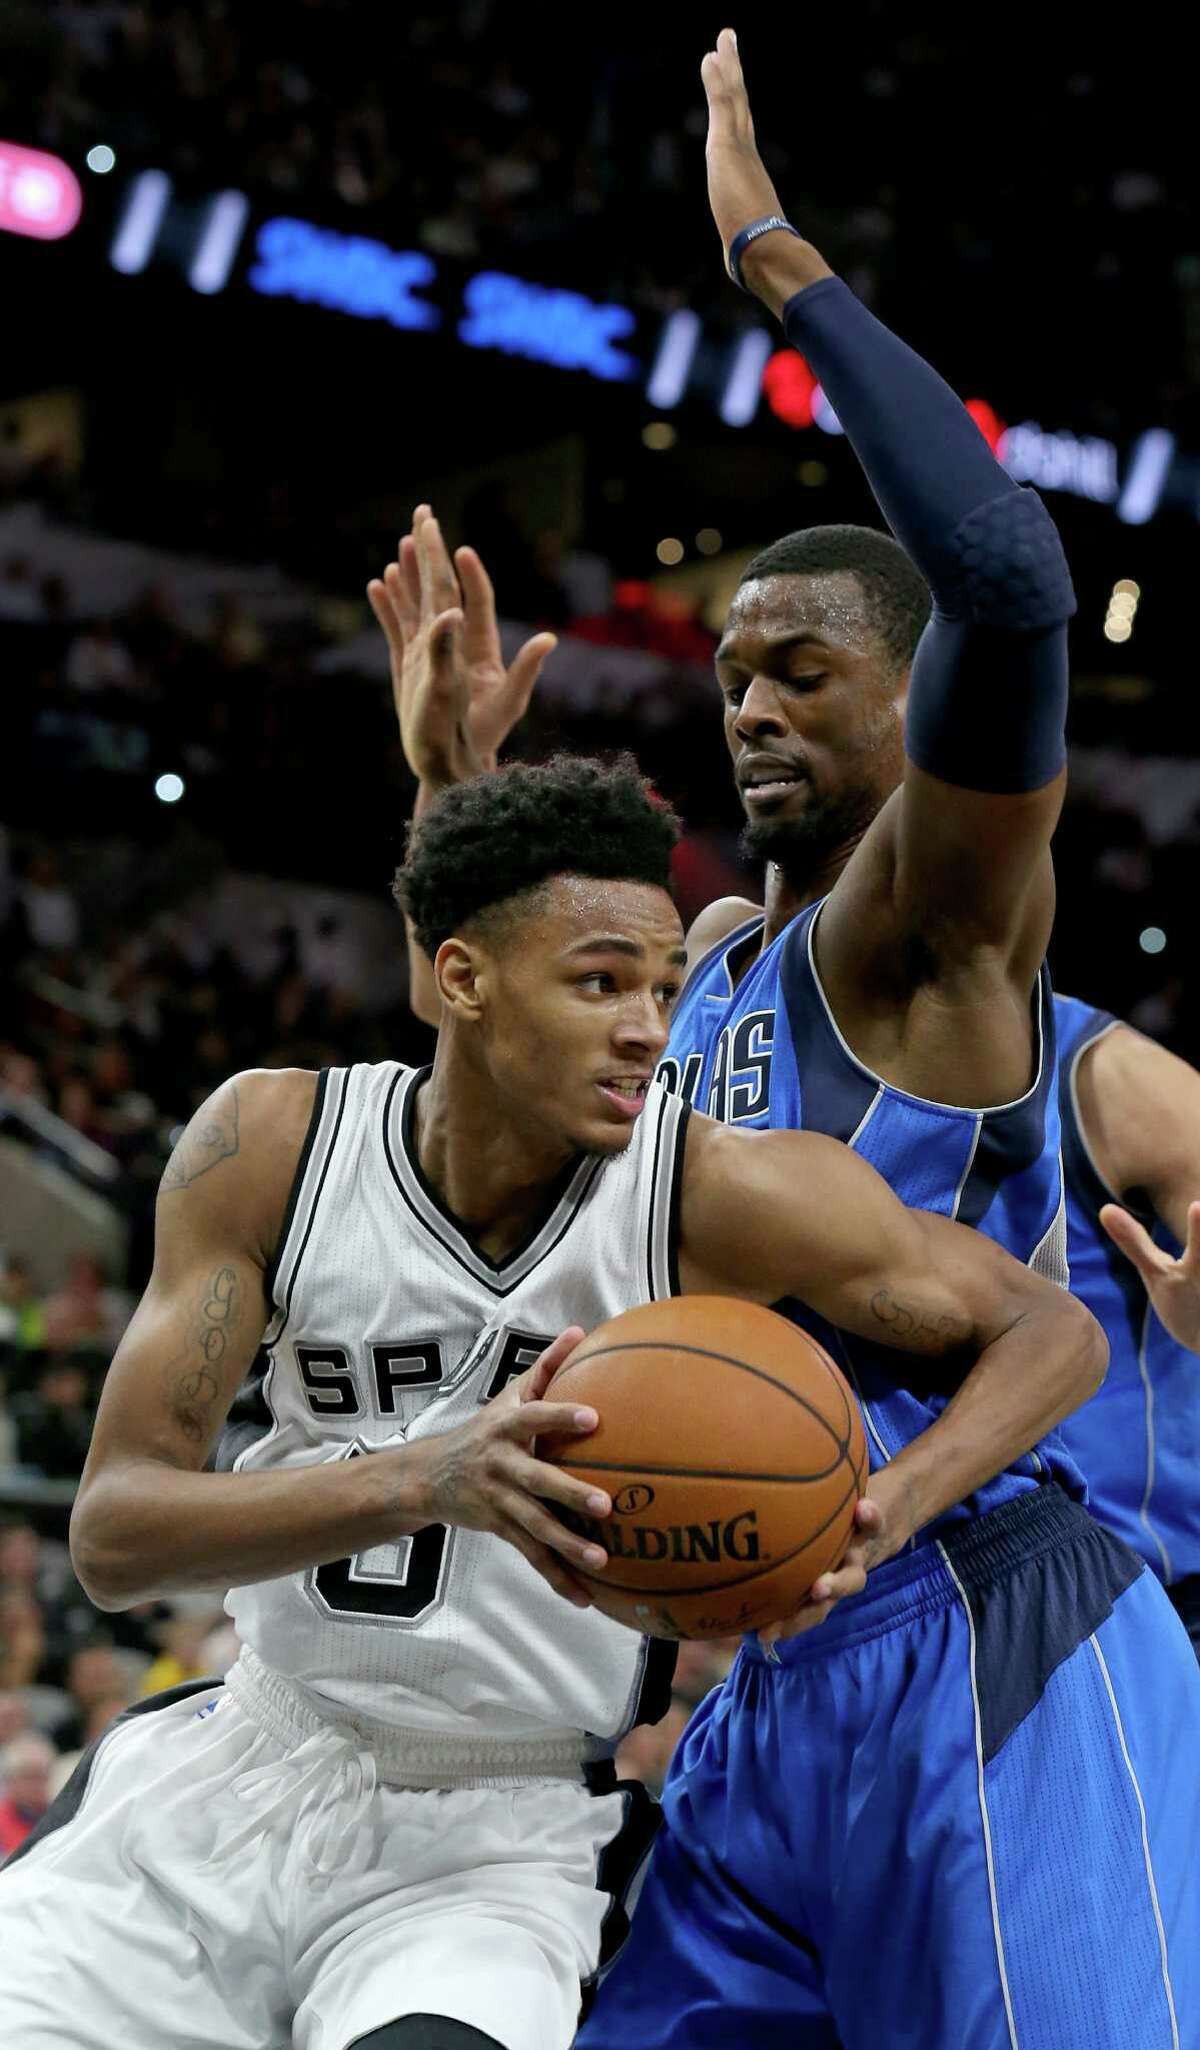 San Antonio Spurs' Dejounte Murray looks for room around Dallas Mavericks' Harrison Barnes during first half action Monday Nov. 21, 2016 at the AT&T Center.